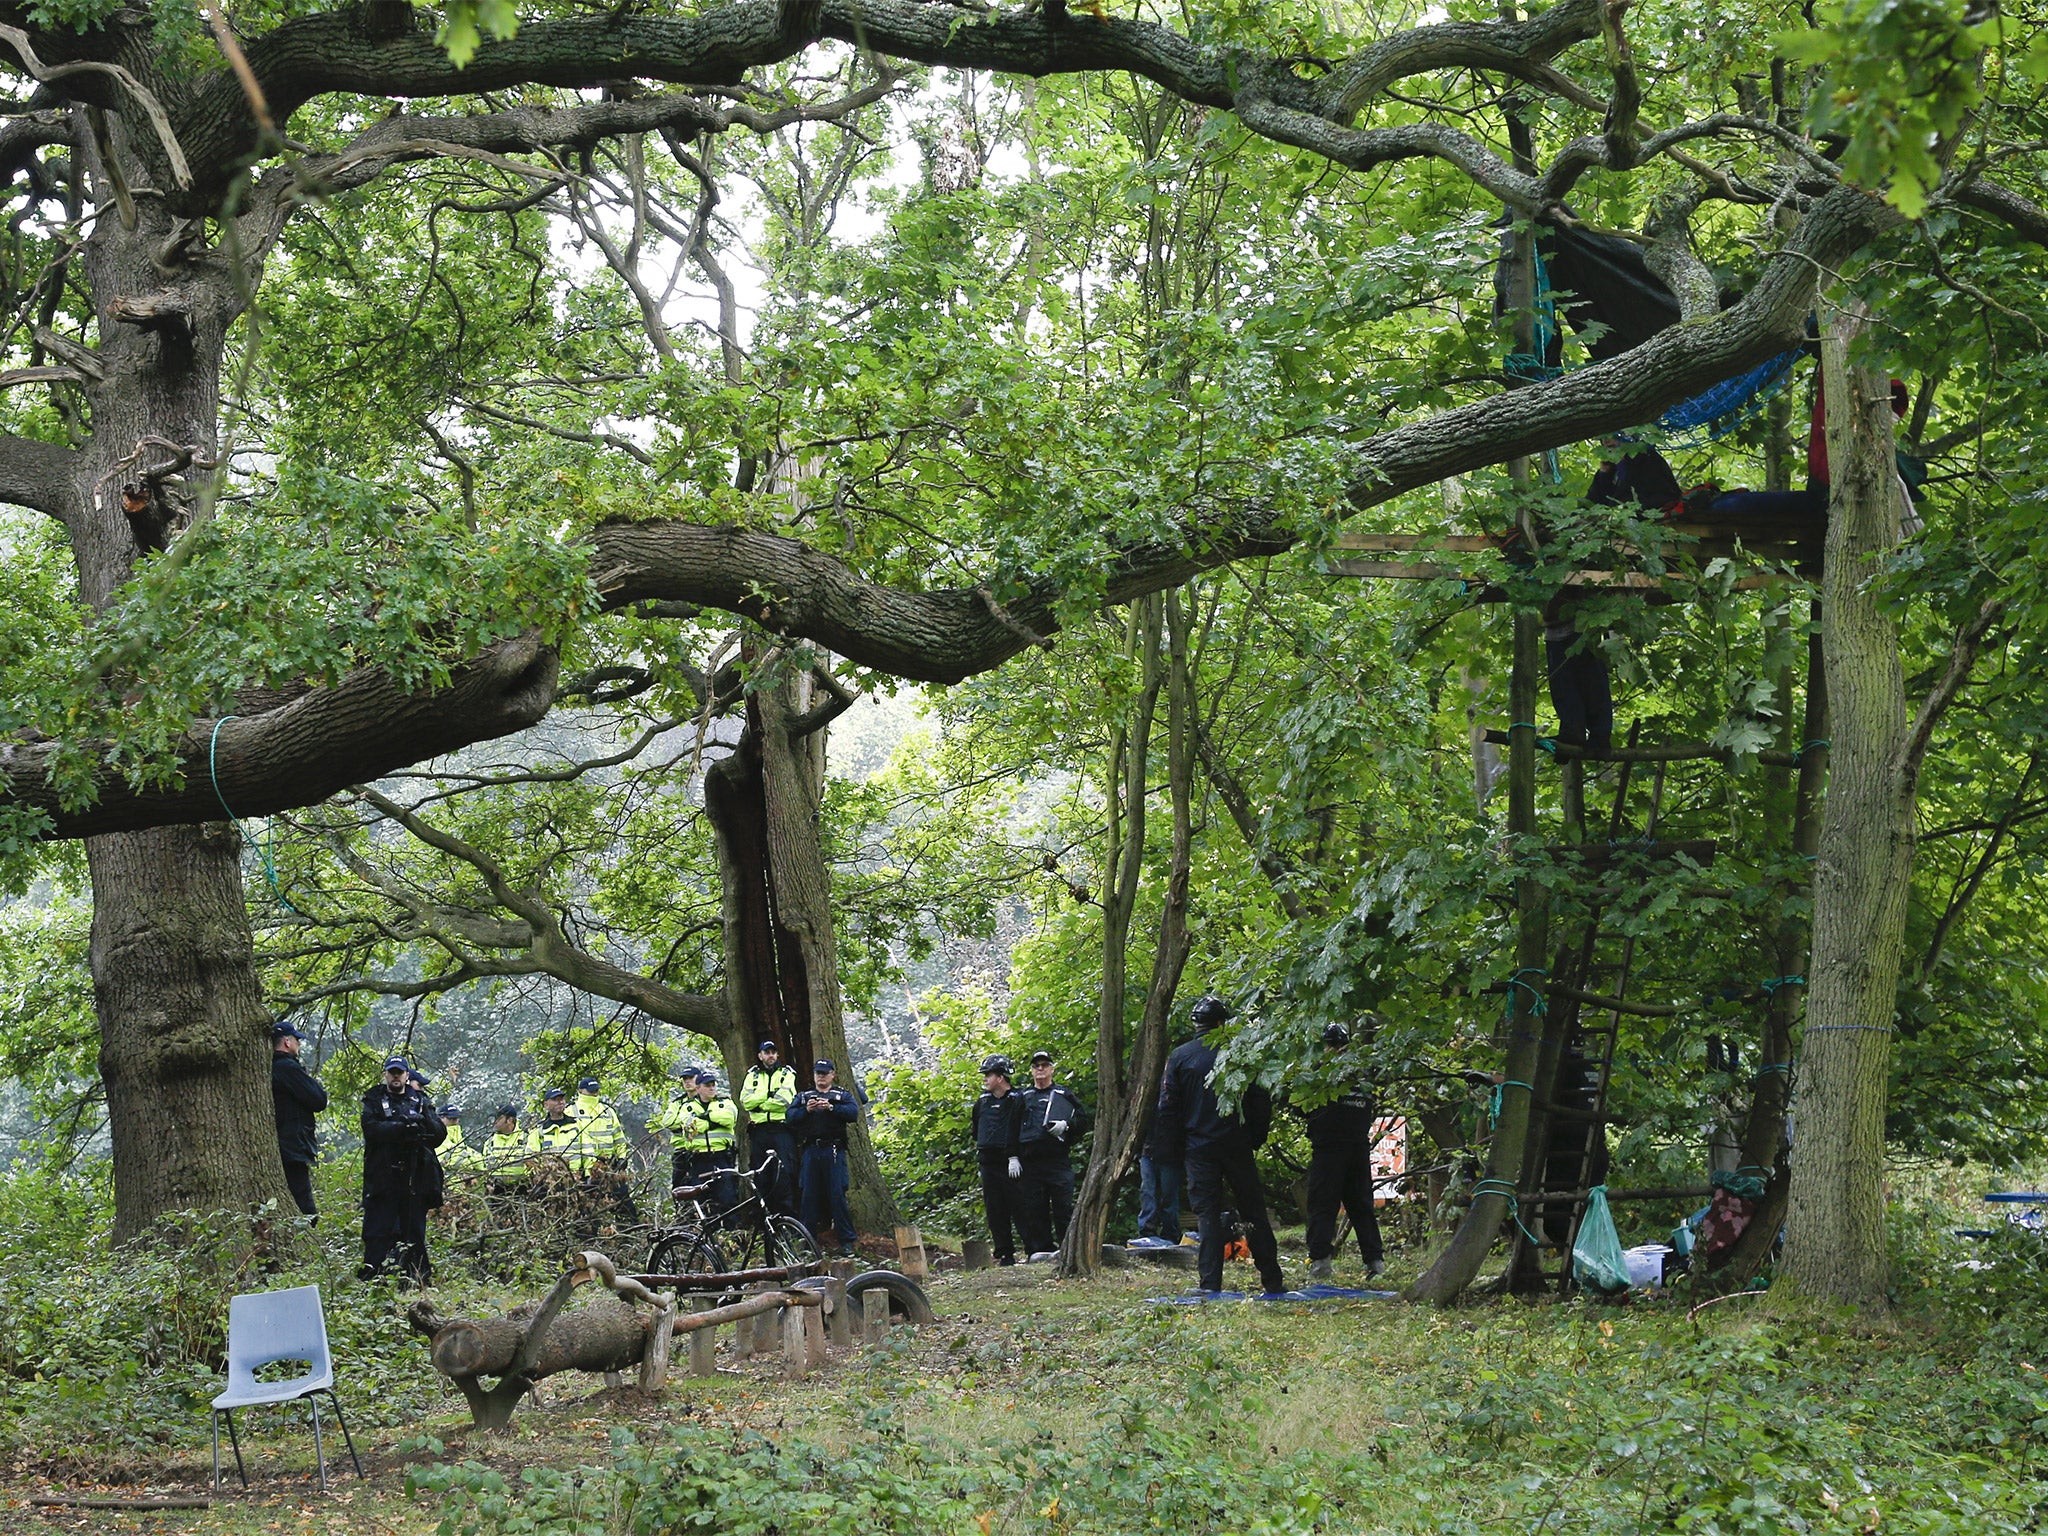 Police target members of the forest community in a treehouse in Runnymede, where King John signed Magna Carta